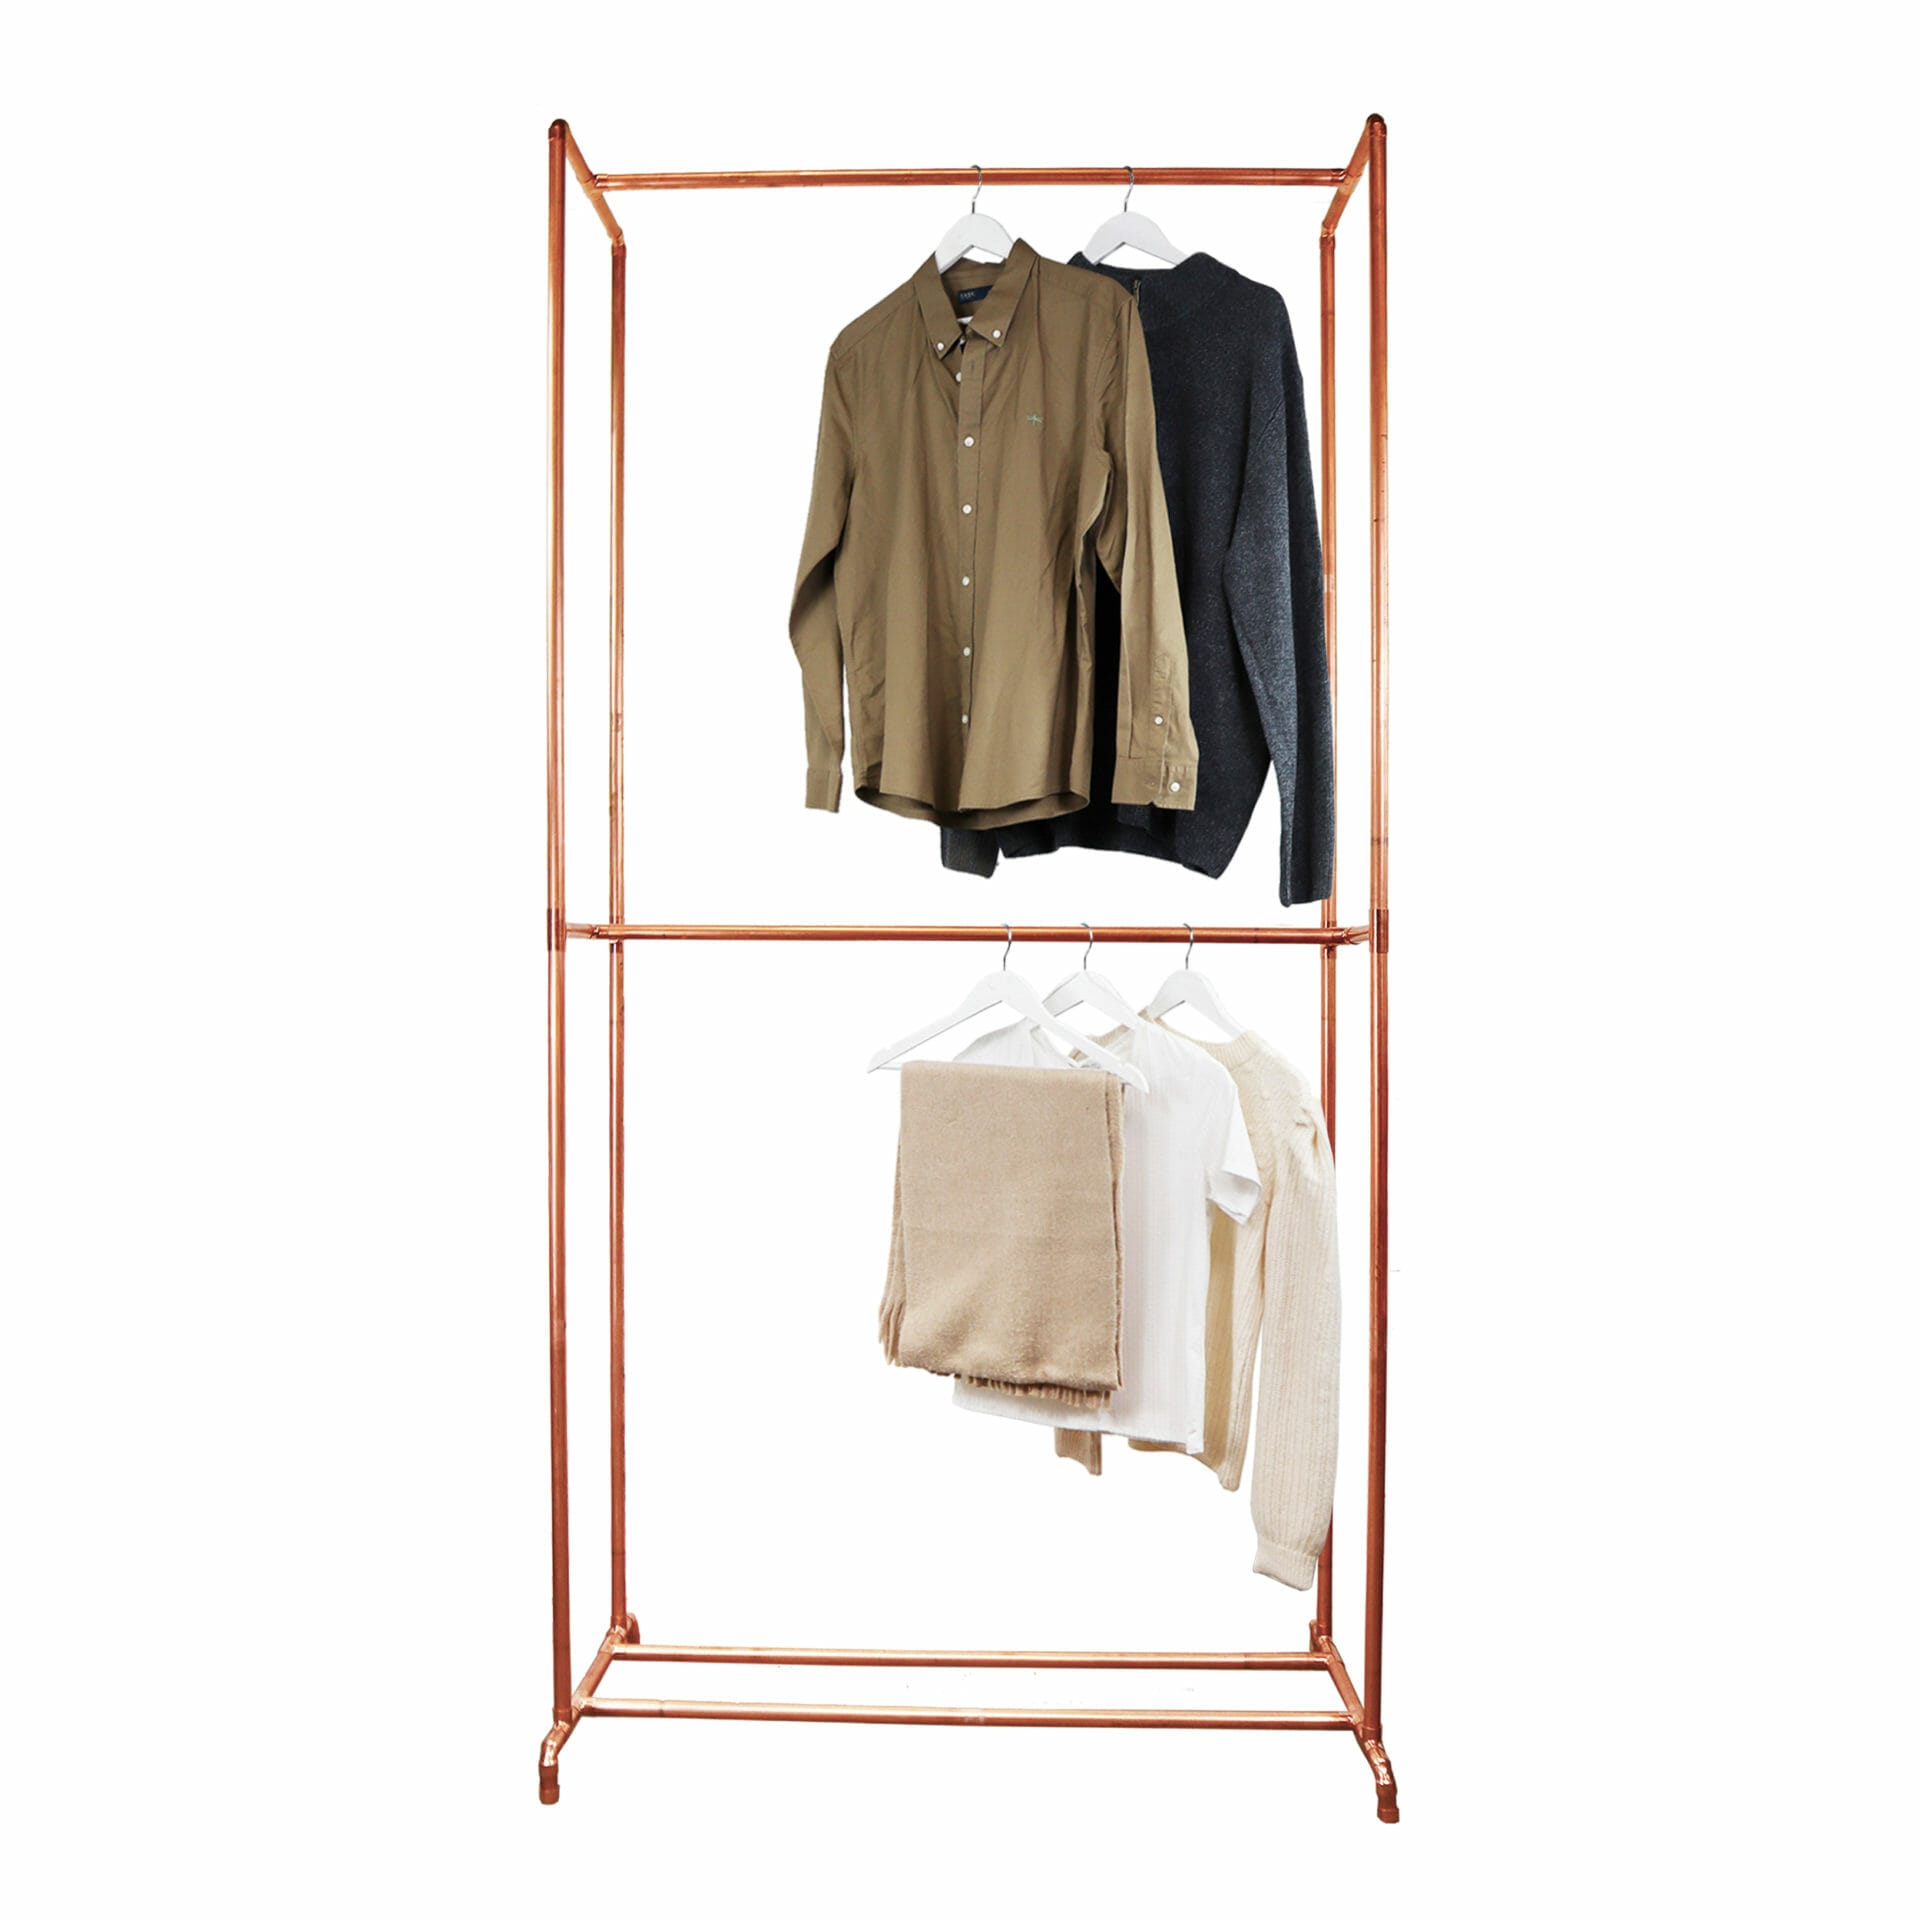 Copper industrial pipe clothing rail freestanding